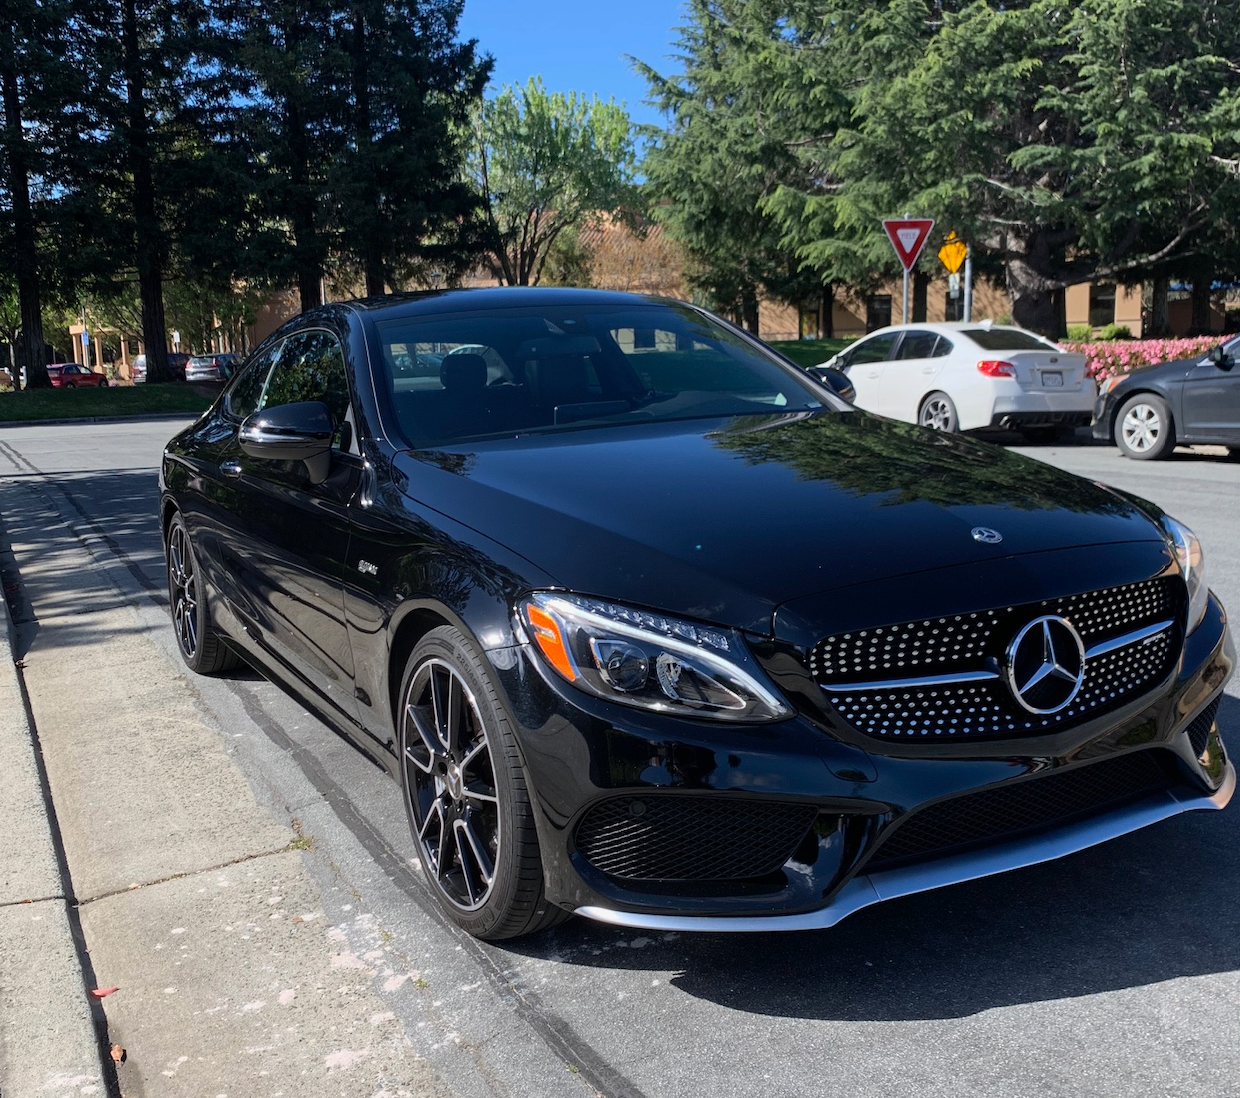 2018 Mercedes-Benz C43 AMG - 2018 C43 AMG Coupe - $685.84 per Month - Searching for Lease Transfer - Used - VIN WDDWJ6EB3JF662003 - 12,260 Miles - 4WD - Automatic - Coupe - Black - Cupertino, CA 95014, United States